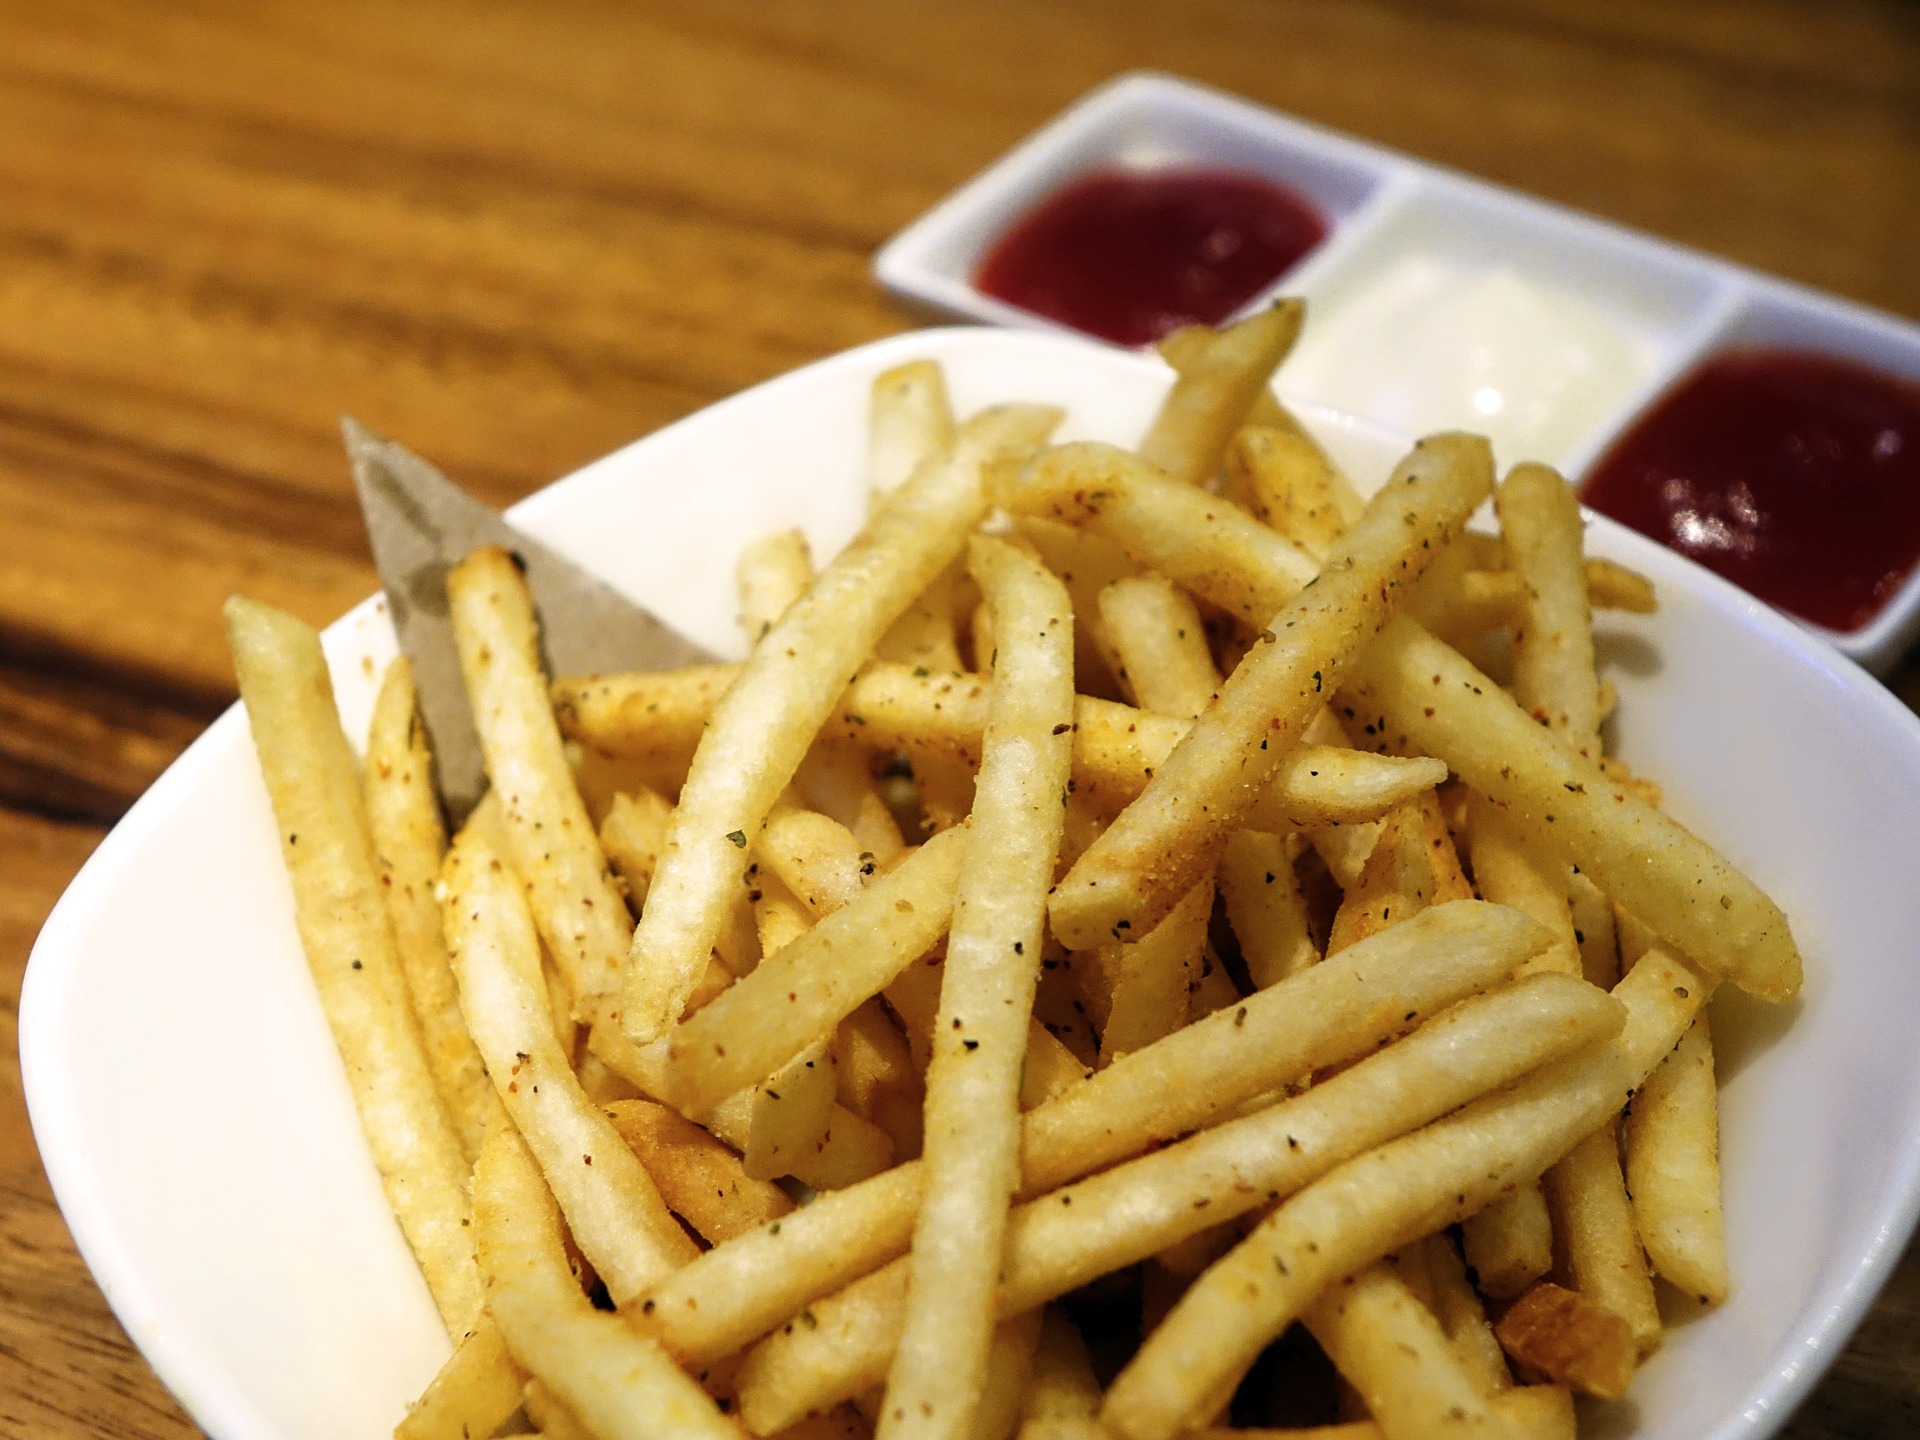 French fries photo